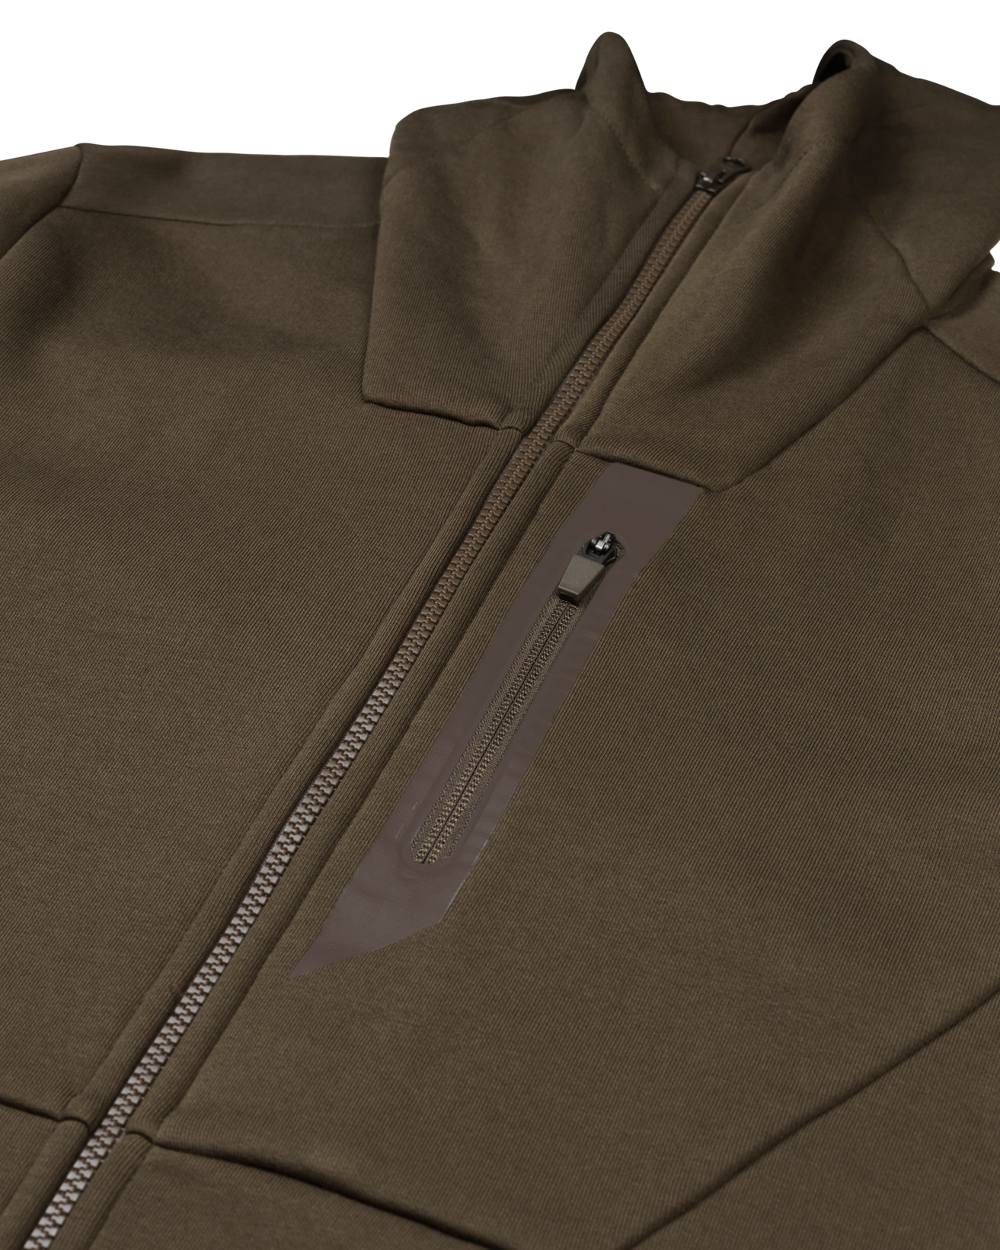 Willow Green coloured Harkila Hoodie on white background 